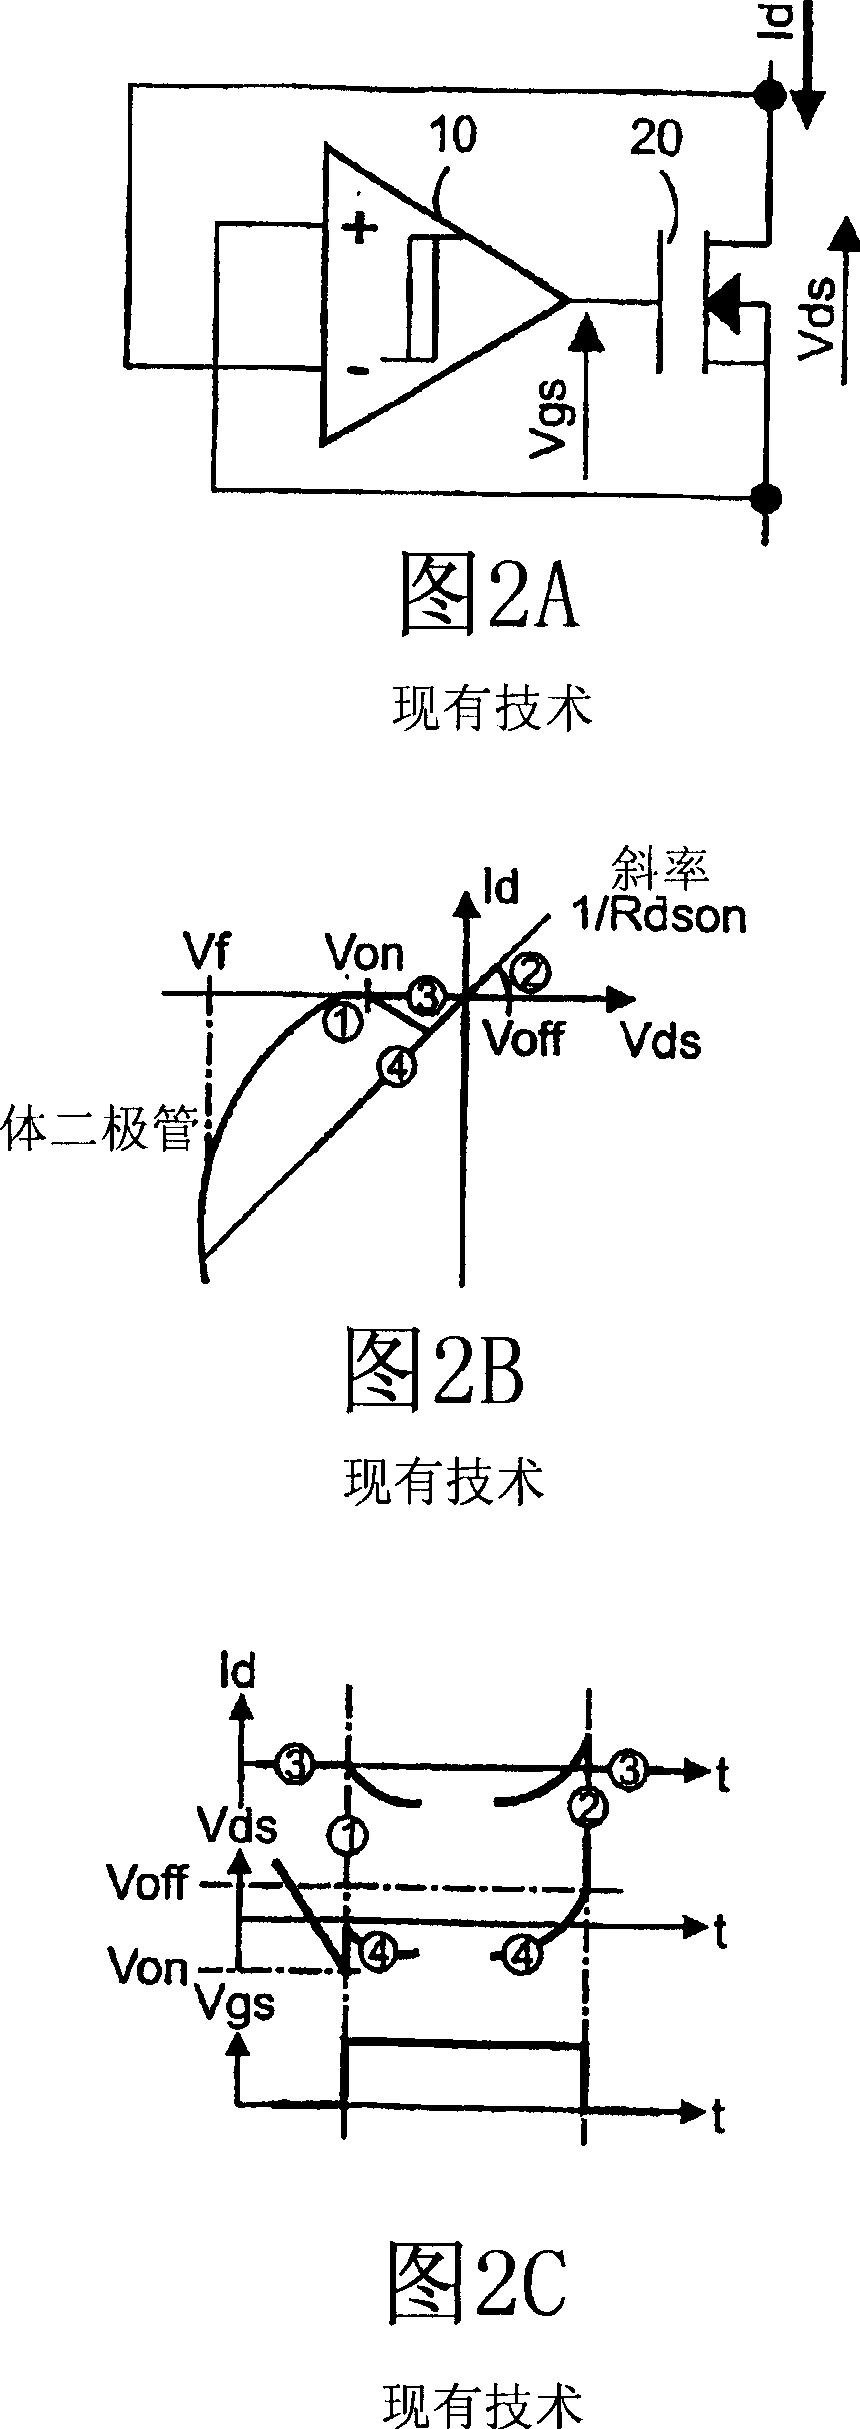 Method and apparatus for driving a power MOS device as a synchronous rectifier